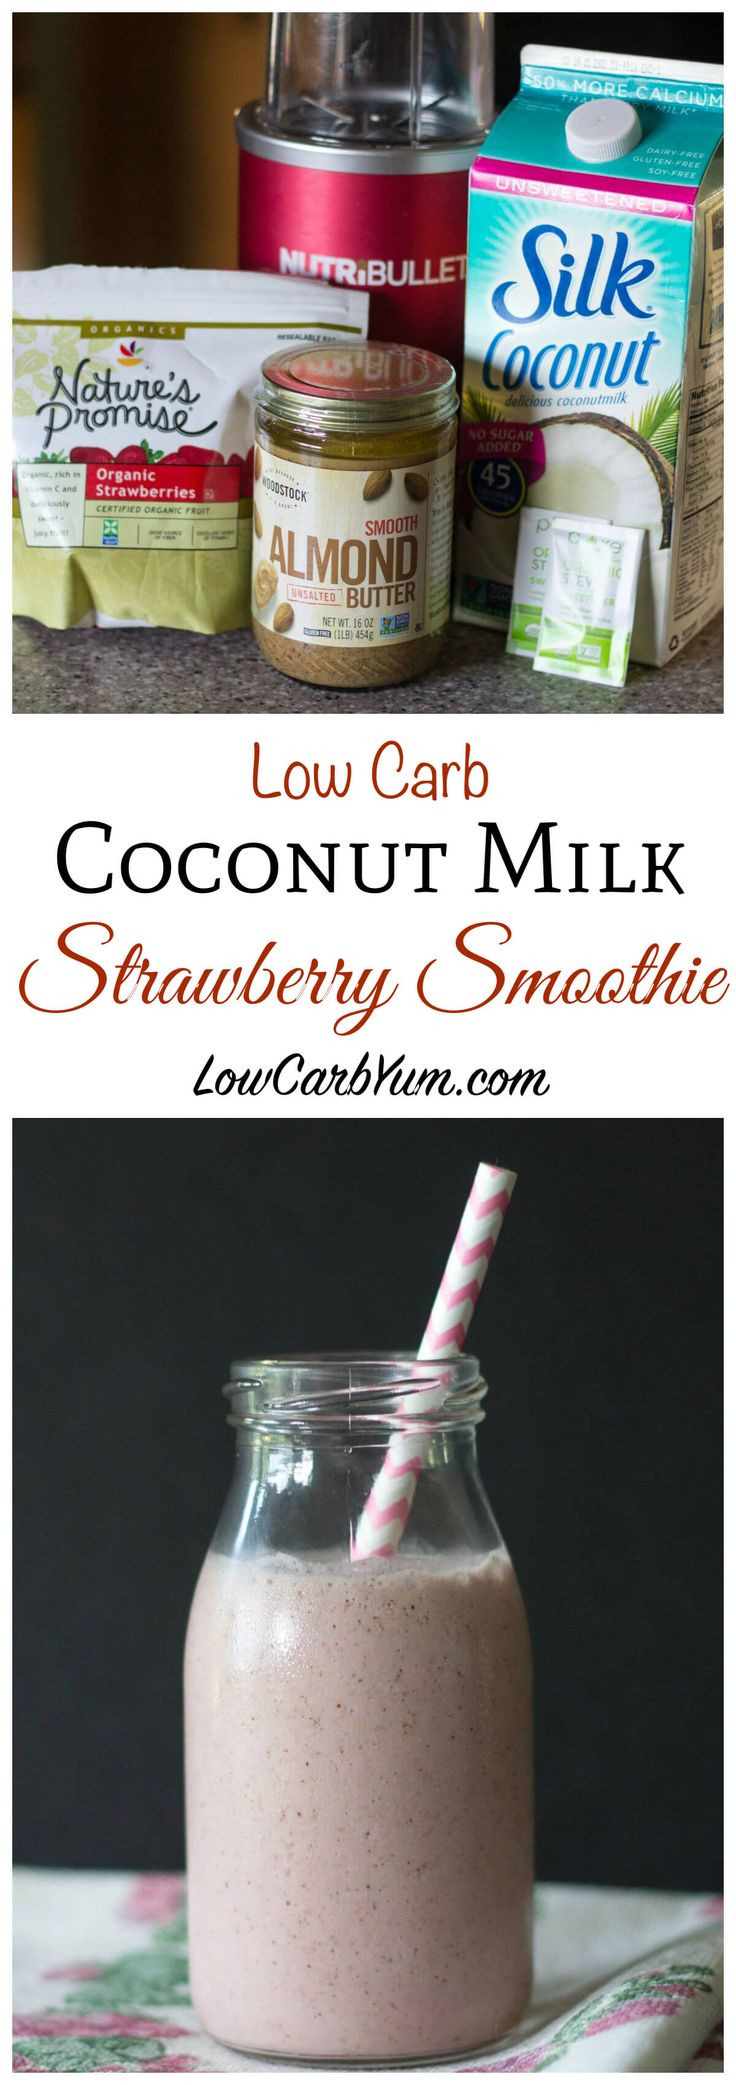 Low Carb Smoothies Atkins
 17 Best ideas about Silk Milk on Pinterest